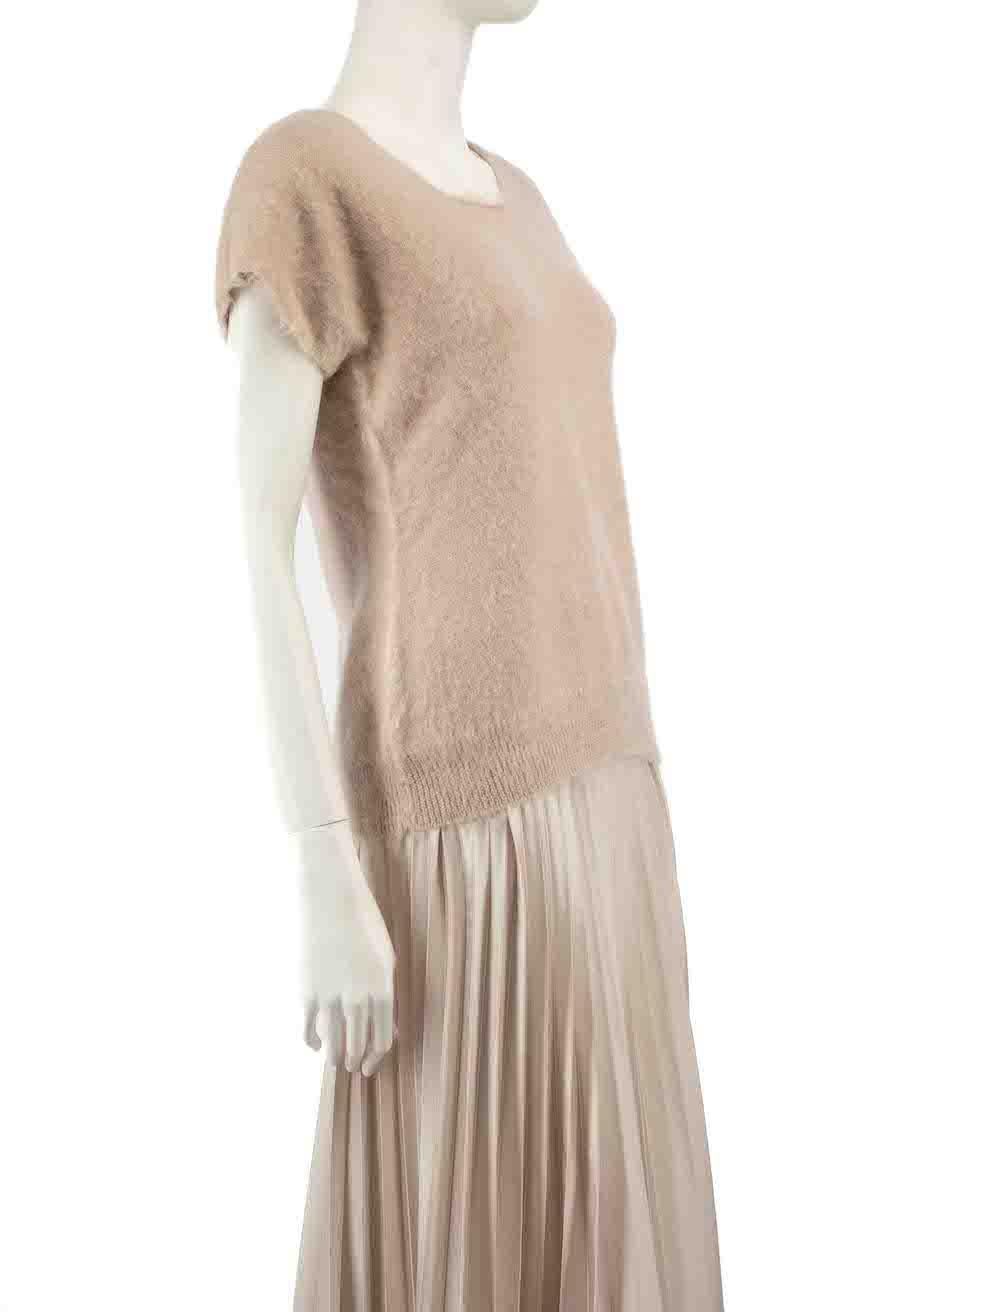 CONDITION is Very good. Hardly any visible wear to top is evident on this used Burberry designer resale item.
 
 
 
 Details
 
 
 Beige
 
 Mohair wool
 
 Short sleeves jumper
 
 Knitted and stretchy
 
 Brushed texture
 
 Round neckline
 
 Back zip